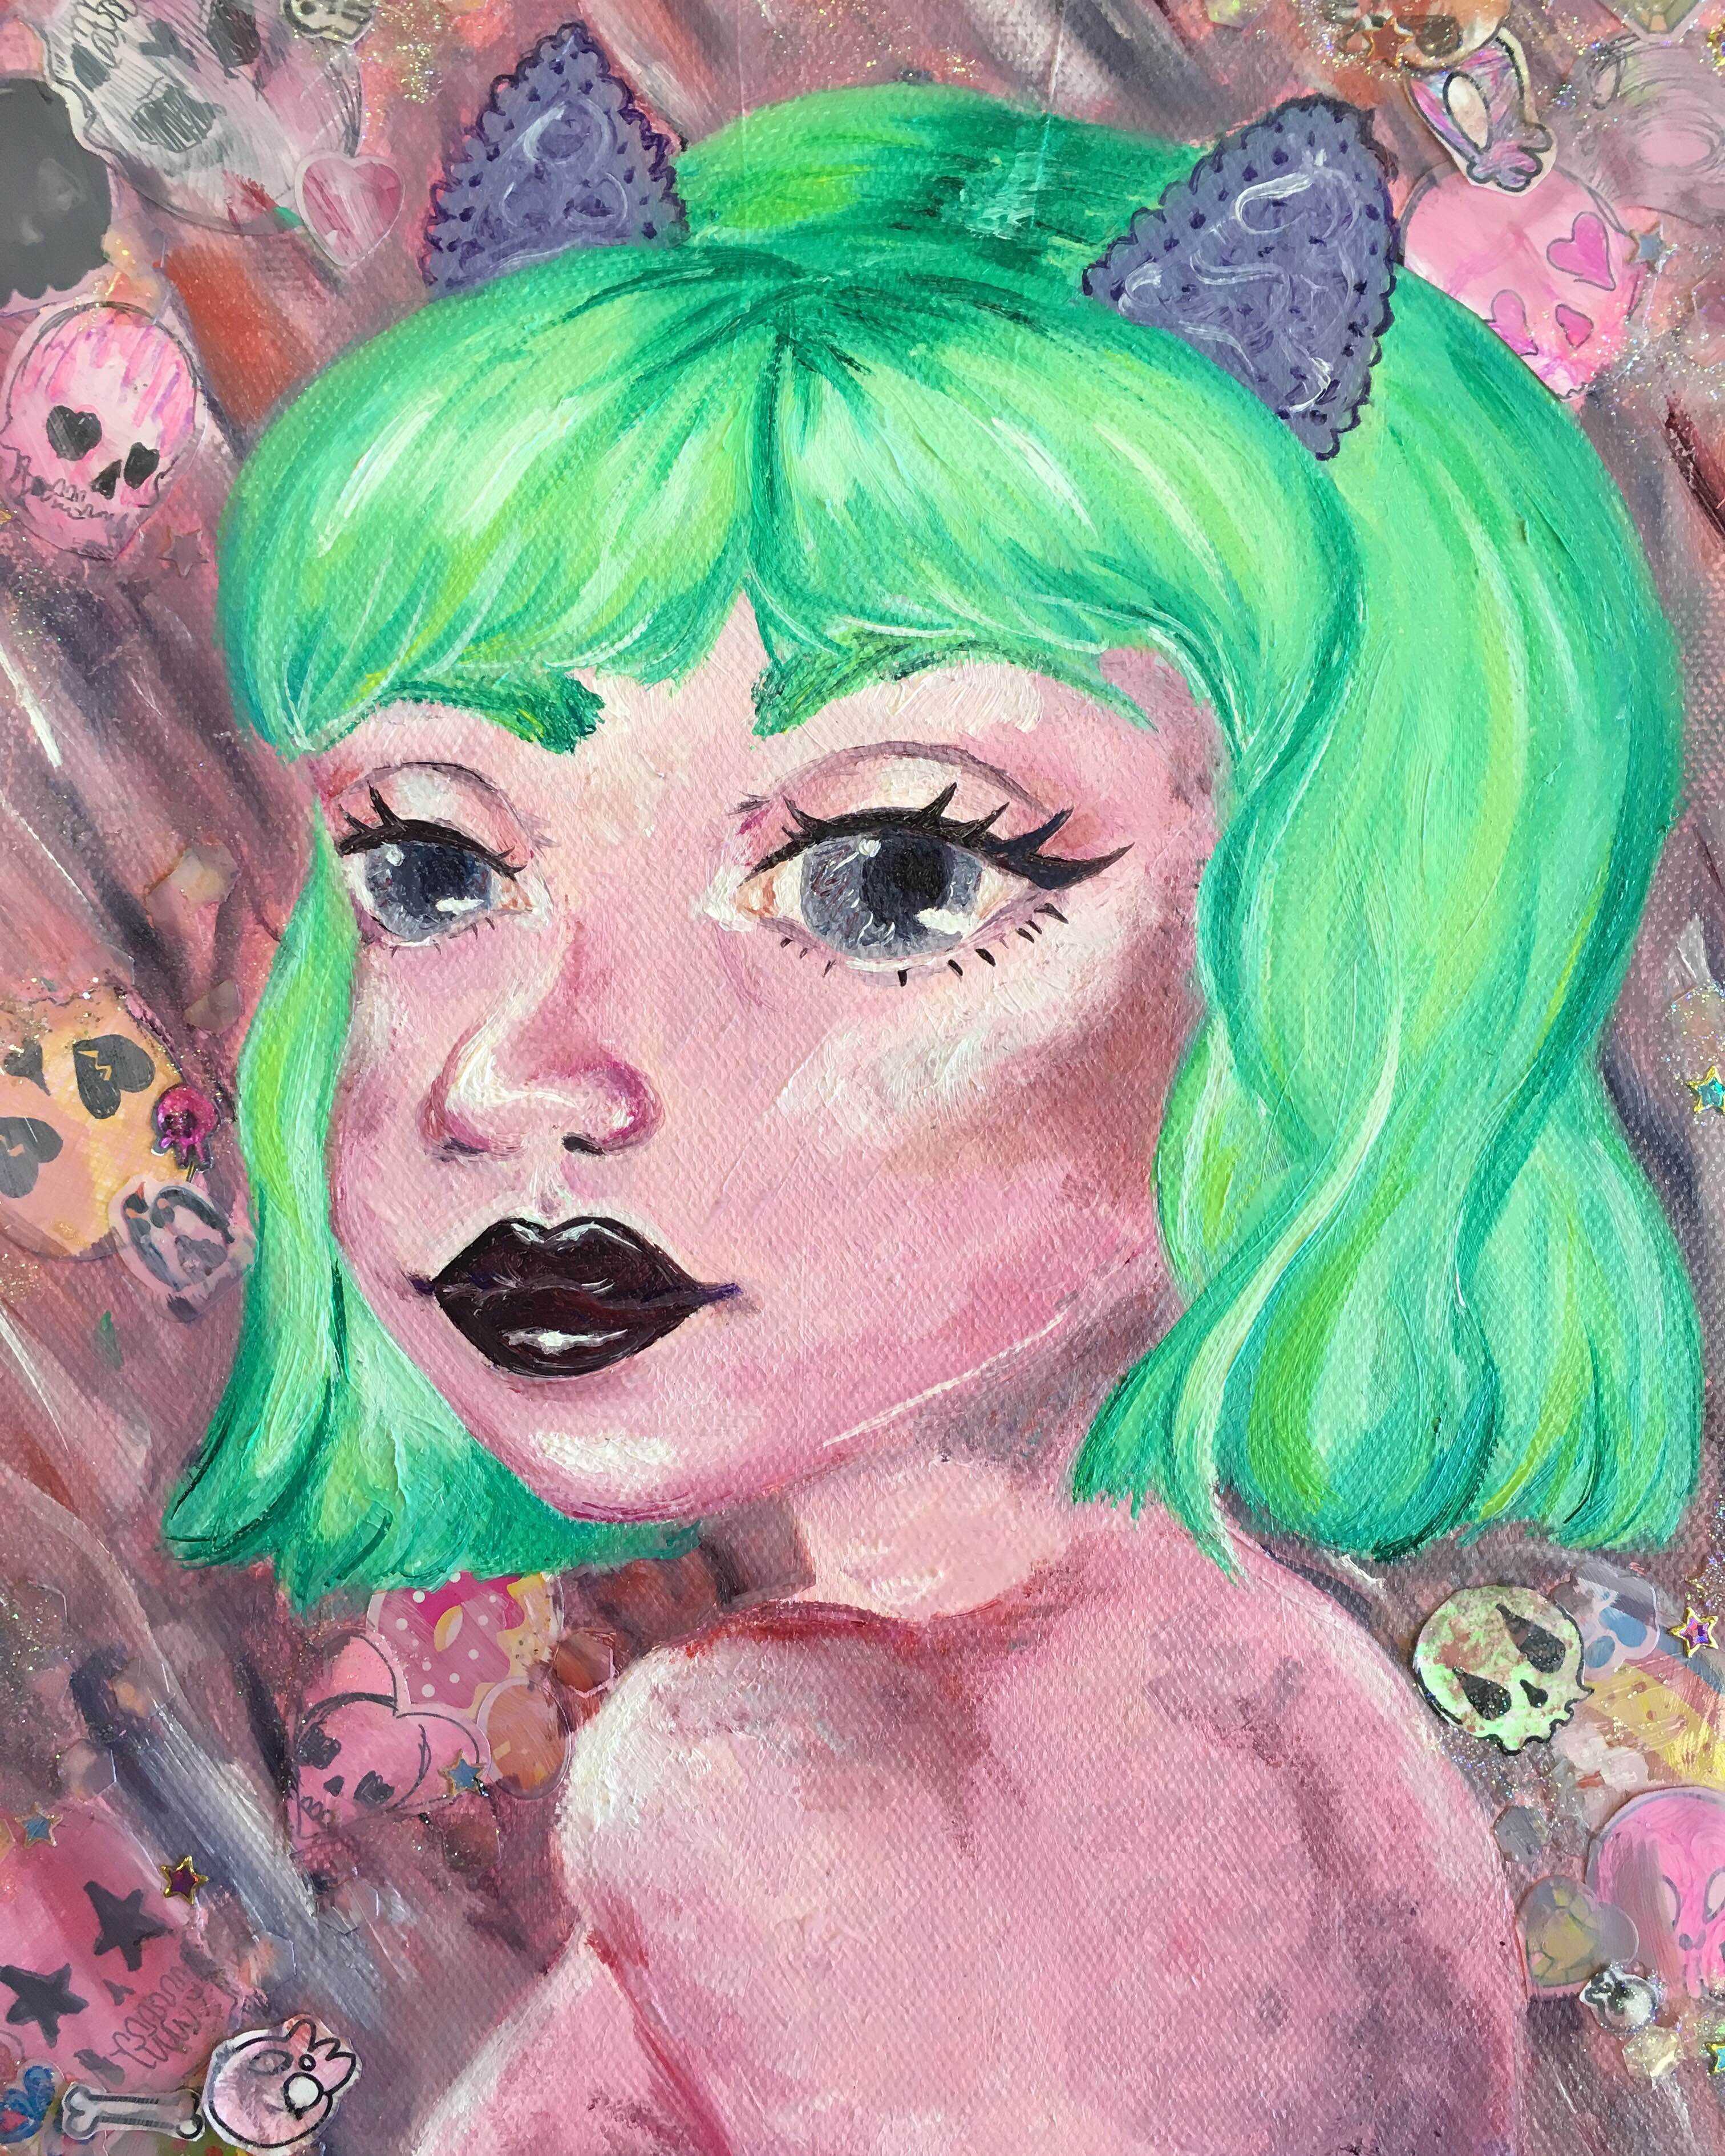 Illustration of a girl with green hair and cat ears surrounded by skulls